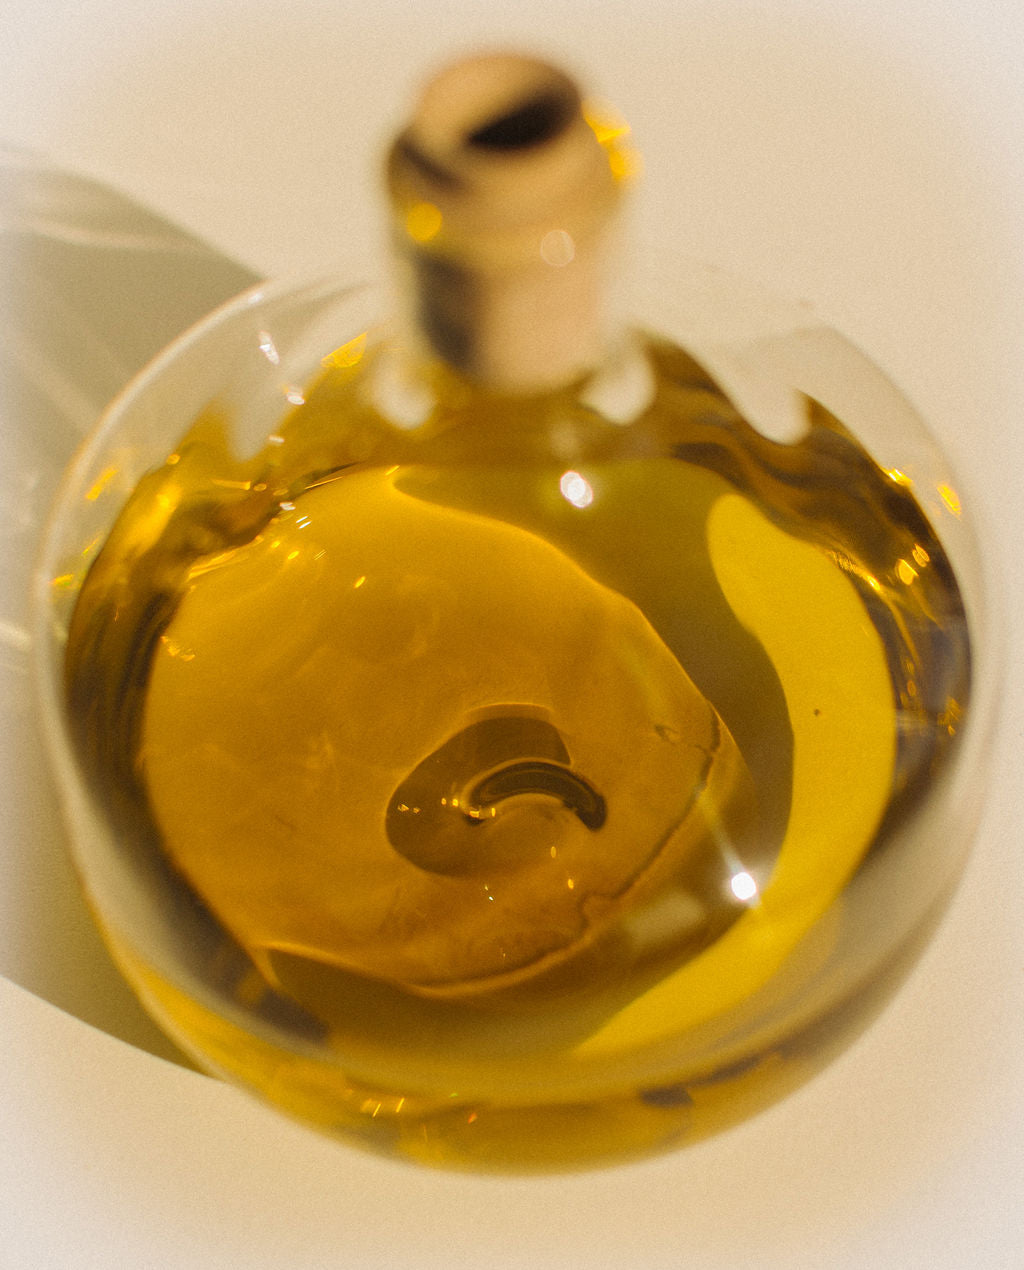 R+D.LAB Trulli bottle filled with olive oil. 